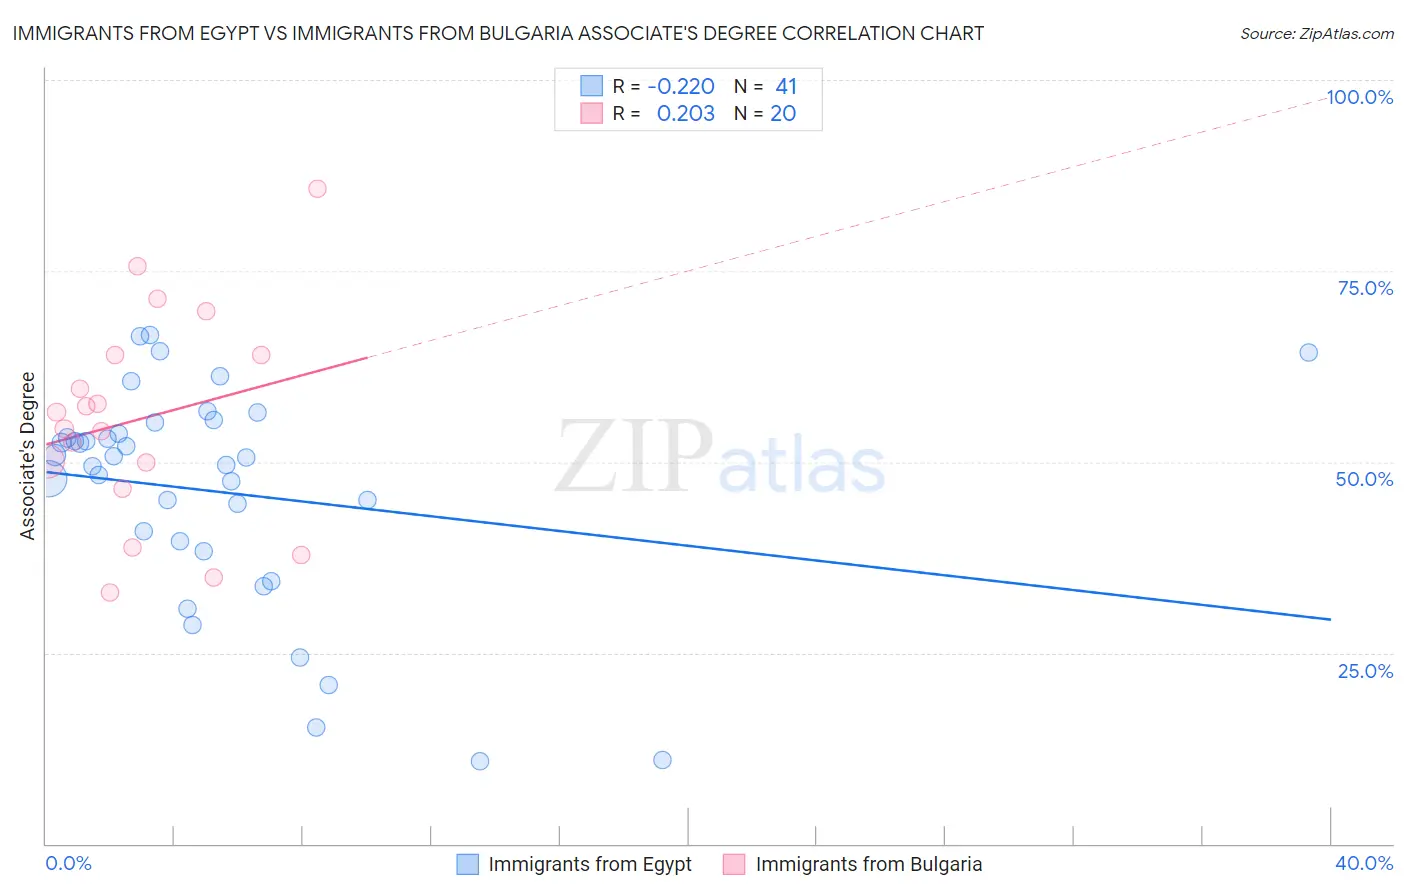 Immigrants from Egypt vs Immigrants from Bulgaria Associate's Degree